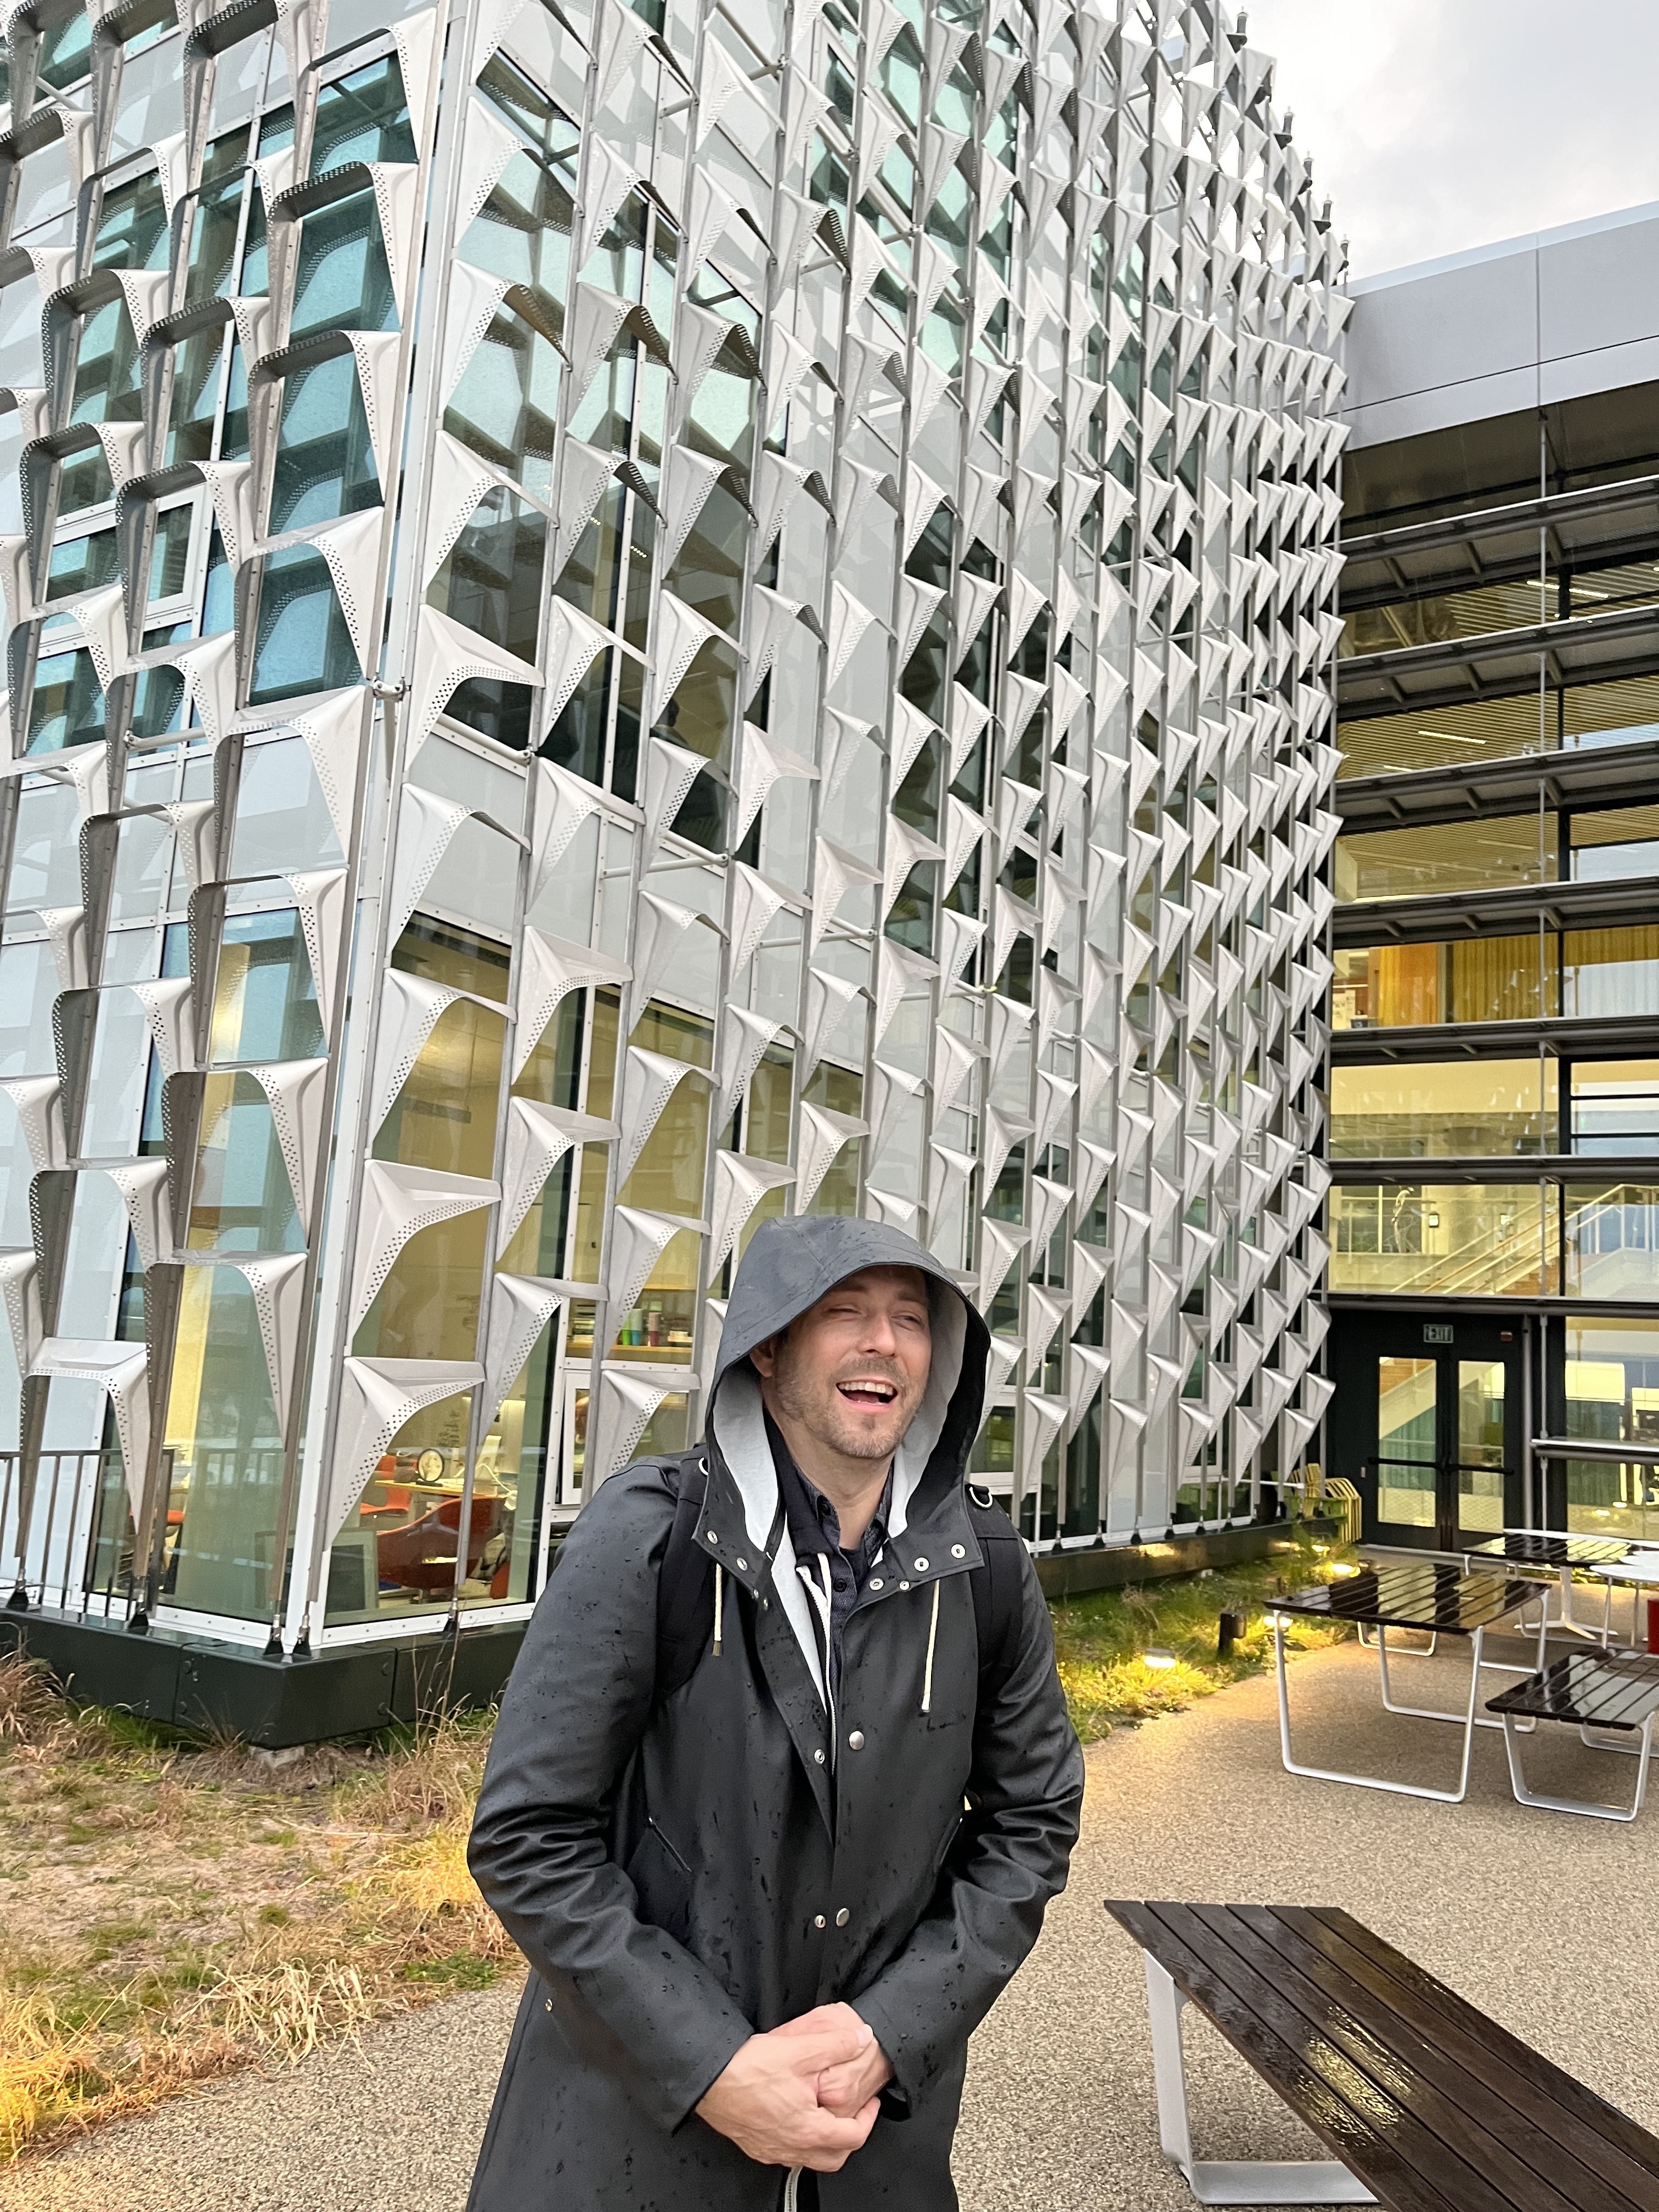 Tim stands in a black raincoat outside in front of a glass building with decorative metal window shades jutting out every few feet to form an intricate grid pattern.